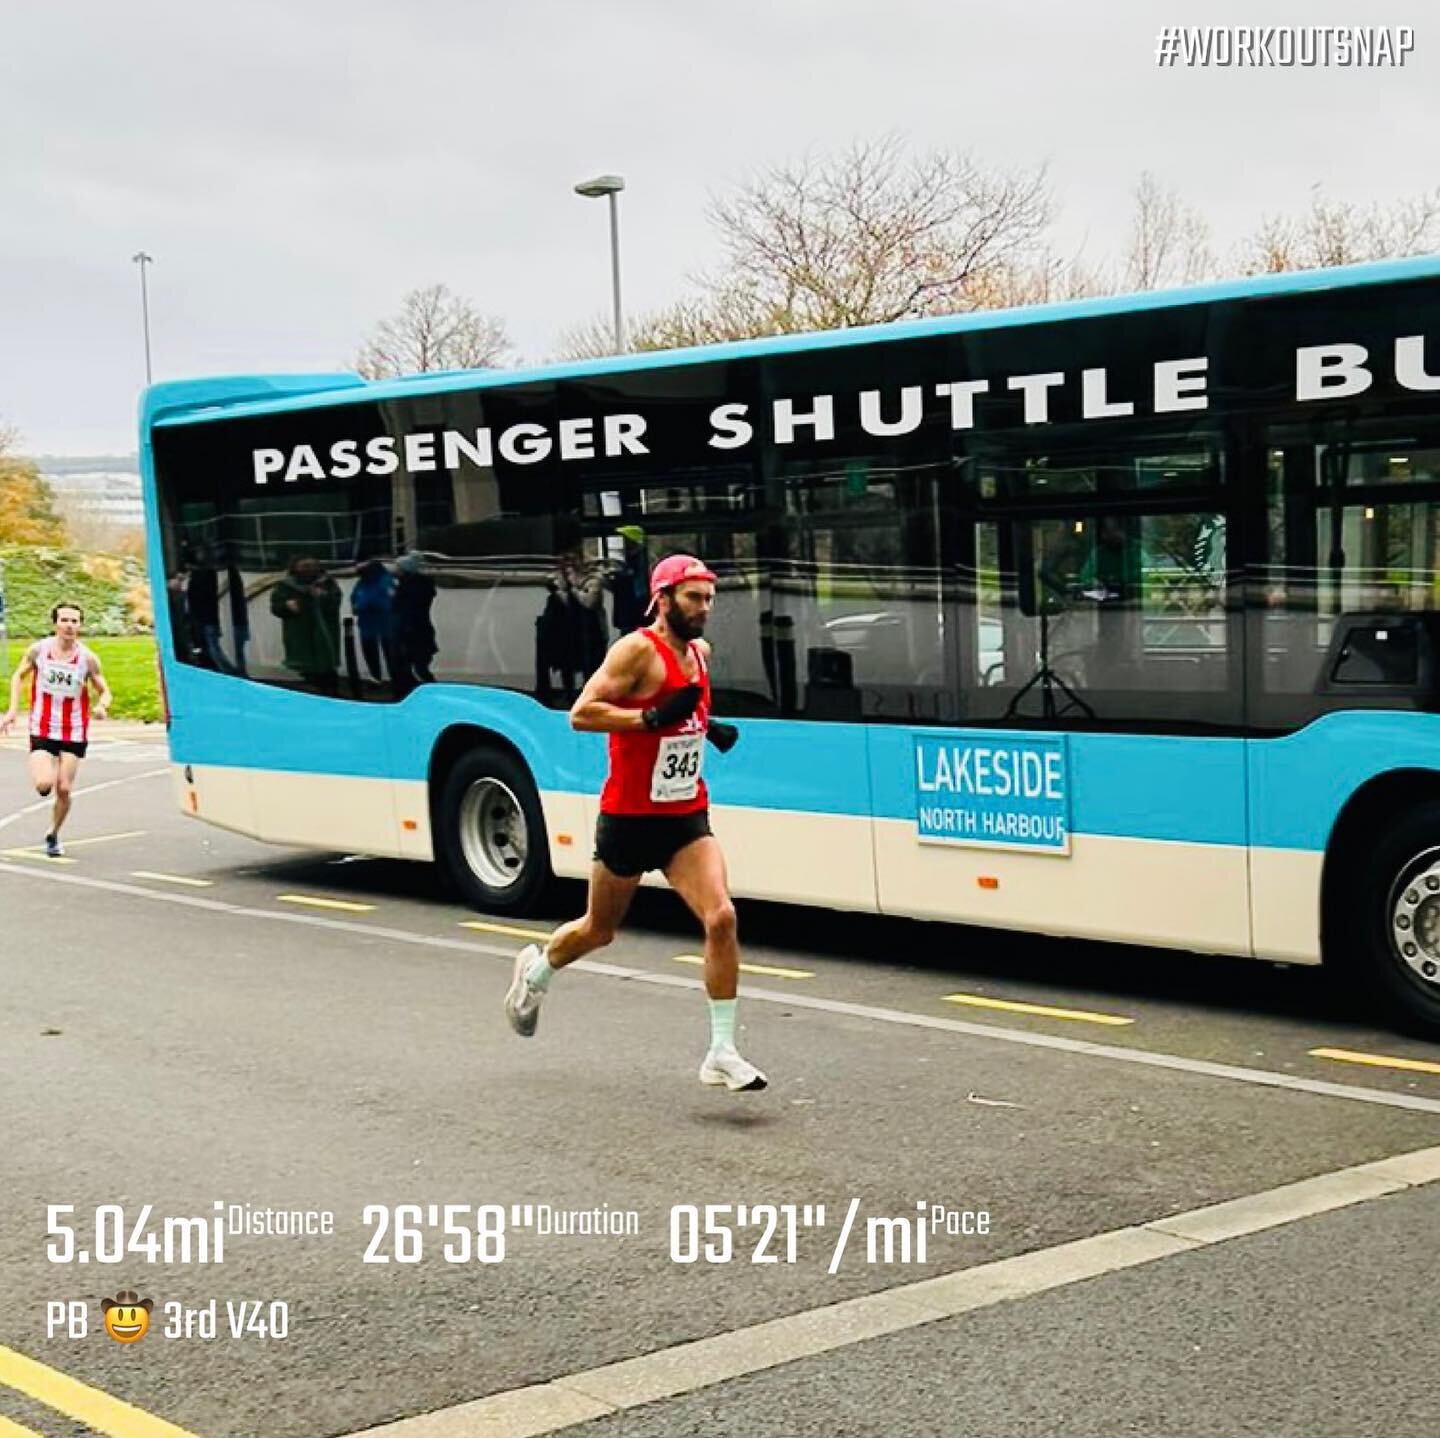 HRRL Victory 5 miler 26:54 💹

Beat the shuttle bus 

Love a good honest race, Ran decent, good group for the most part, Shorts &amp; Vest with a nip in the air 👌 

#duathlon #runnersofinstagram #work #hustle #keepinkeepingon